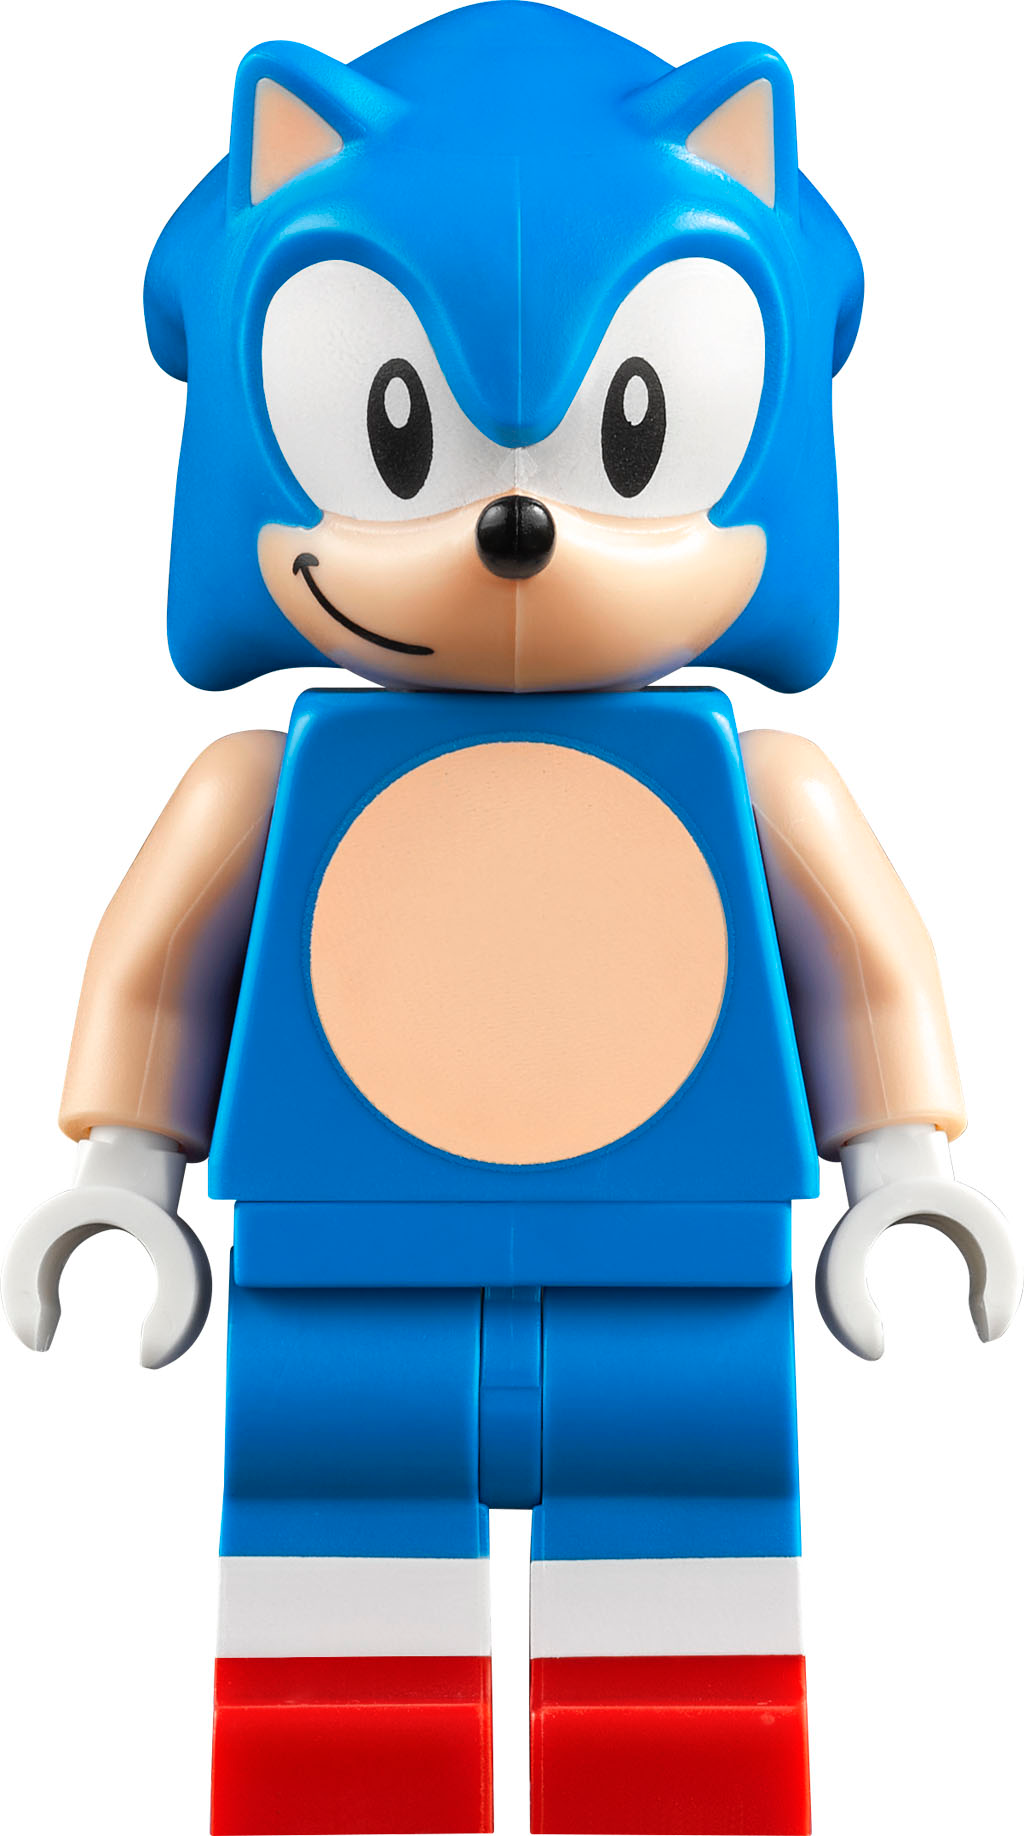 Lego Sonic The Hedgehog is now officially a thing in Lego Dimensions